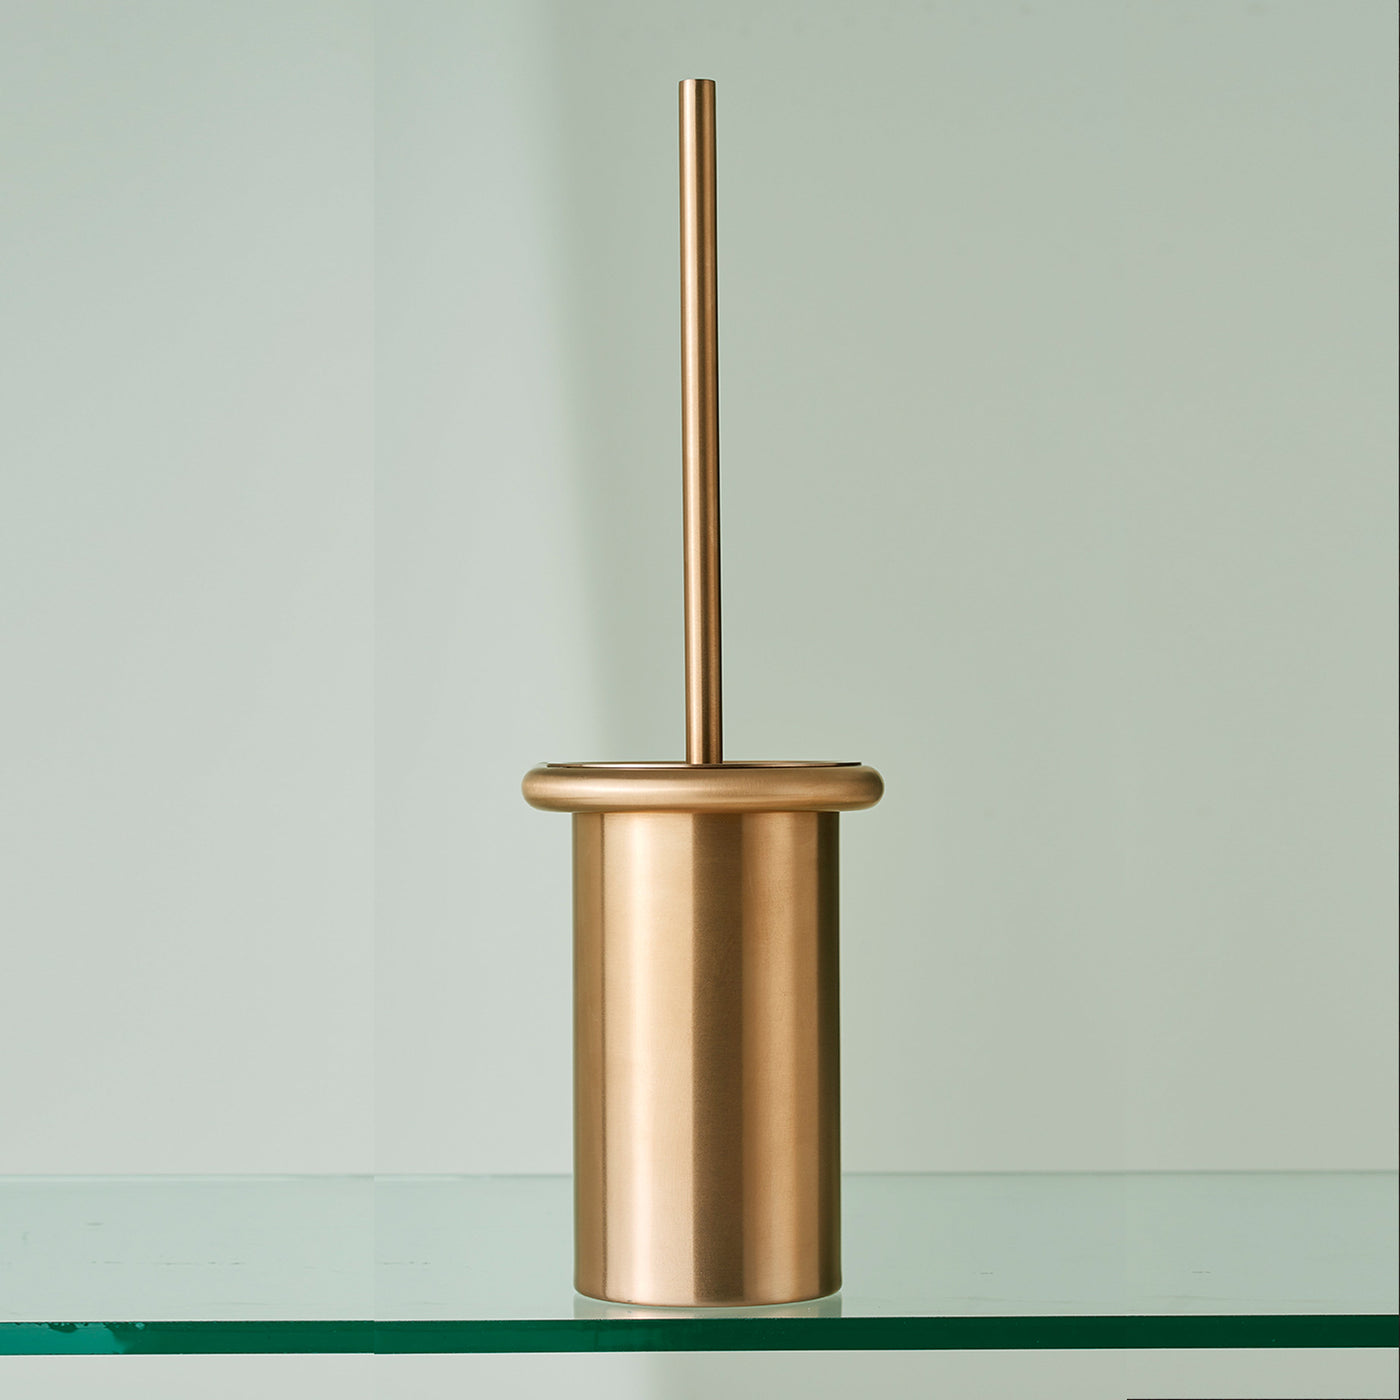 The Knud Toilet Brush Holder is part of the sanitary line by d line and is available in a variety of finishes, including copper and brass.